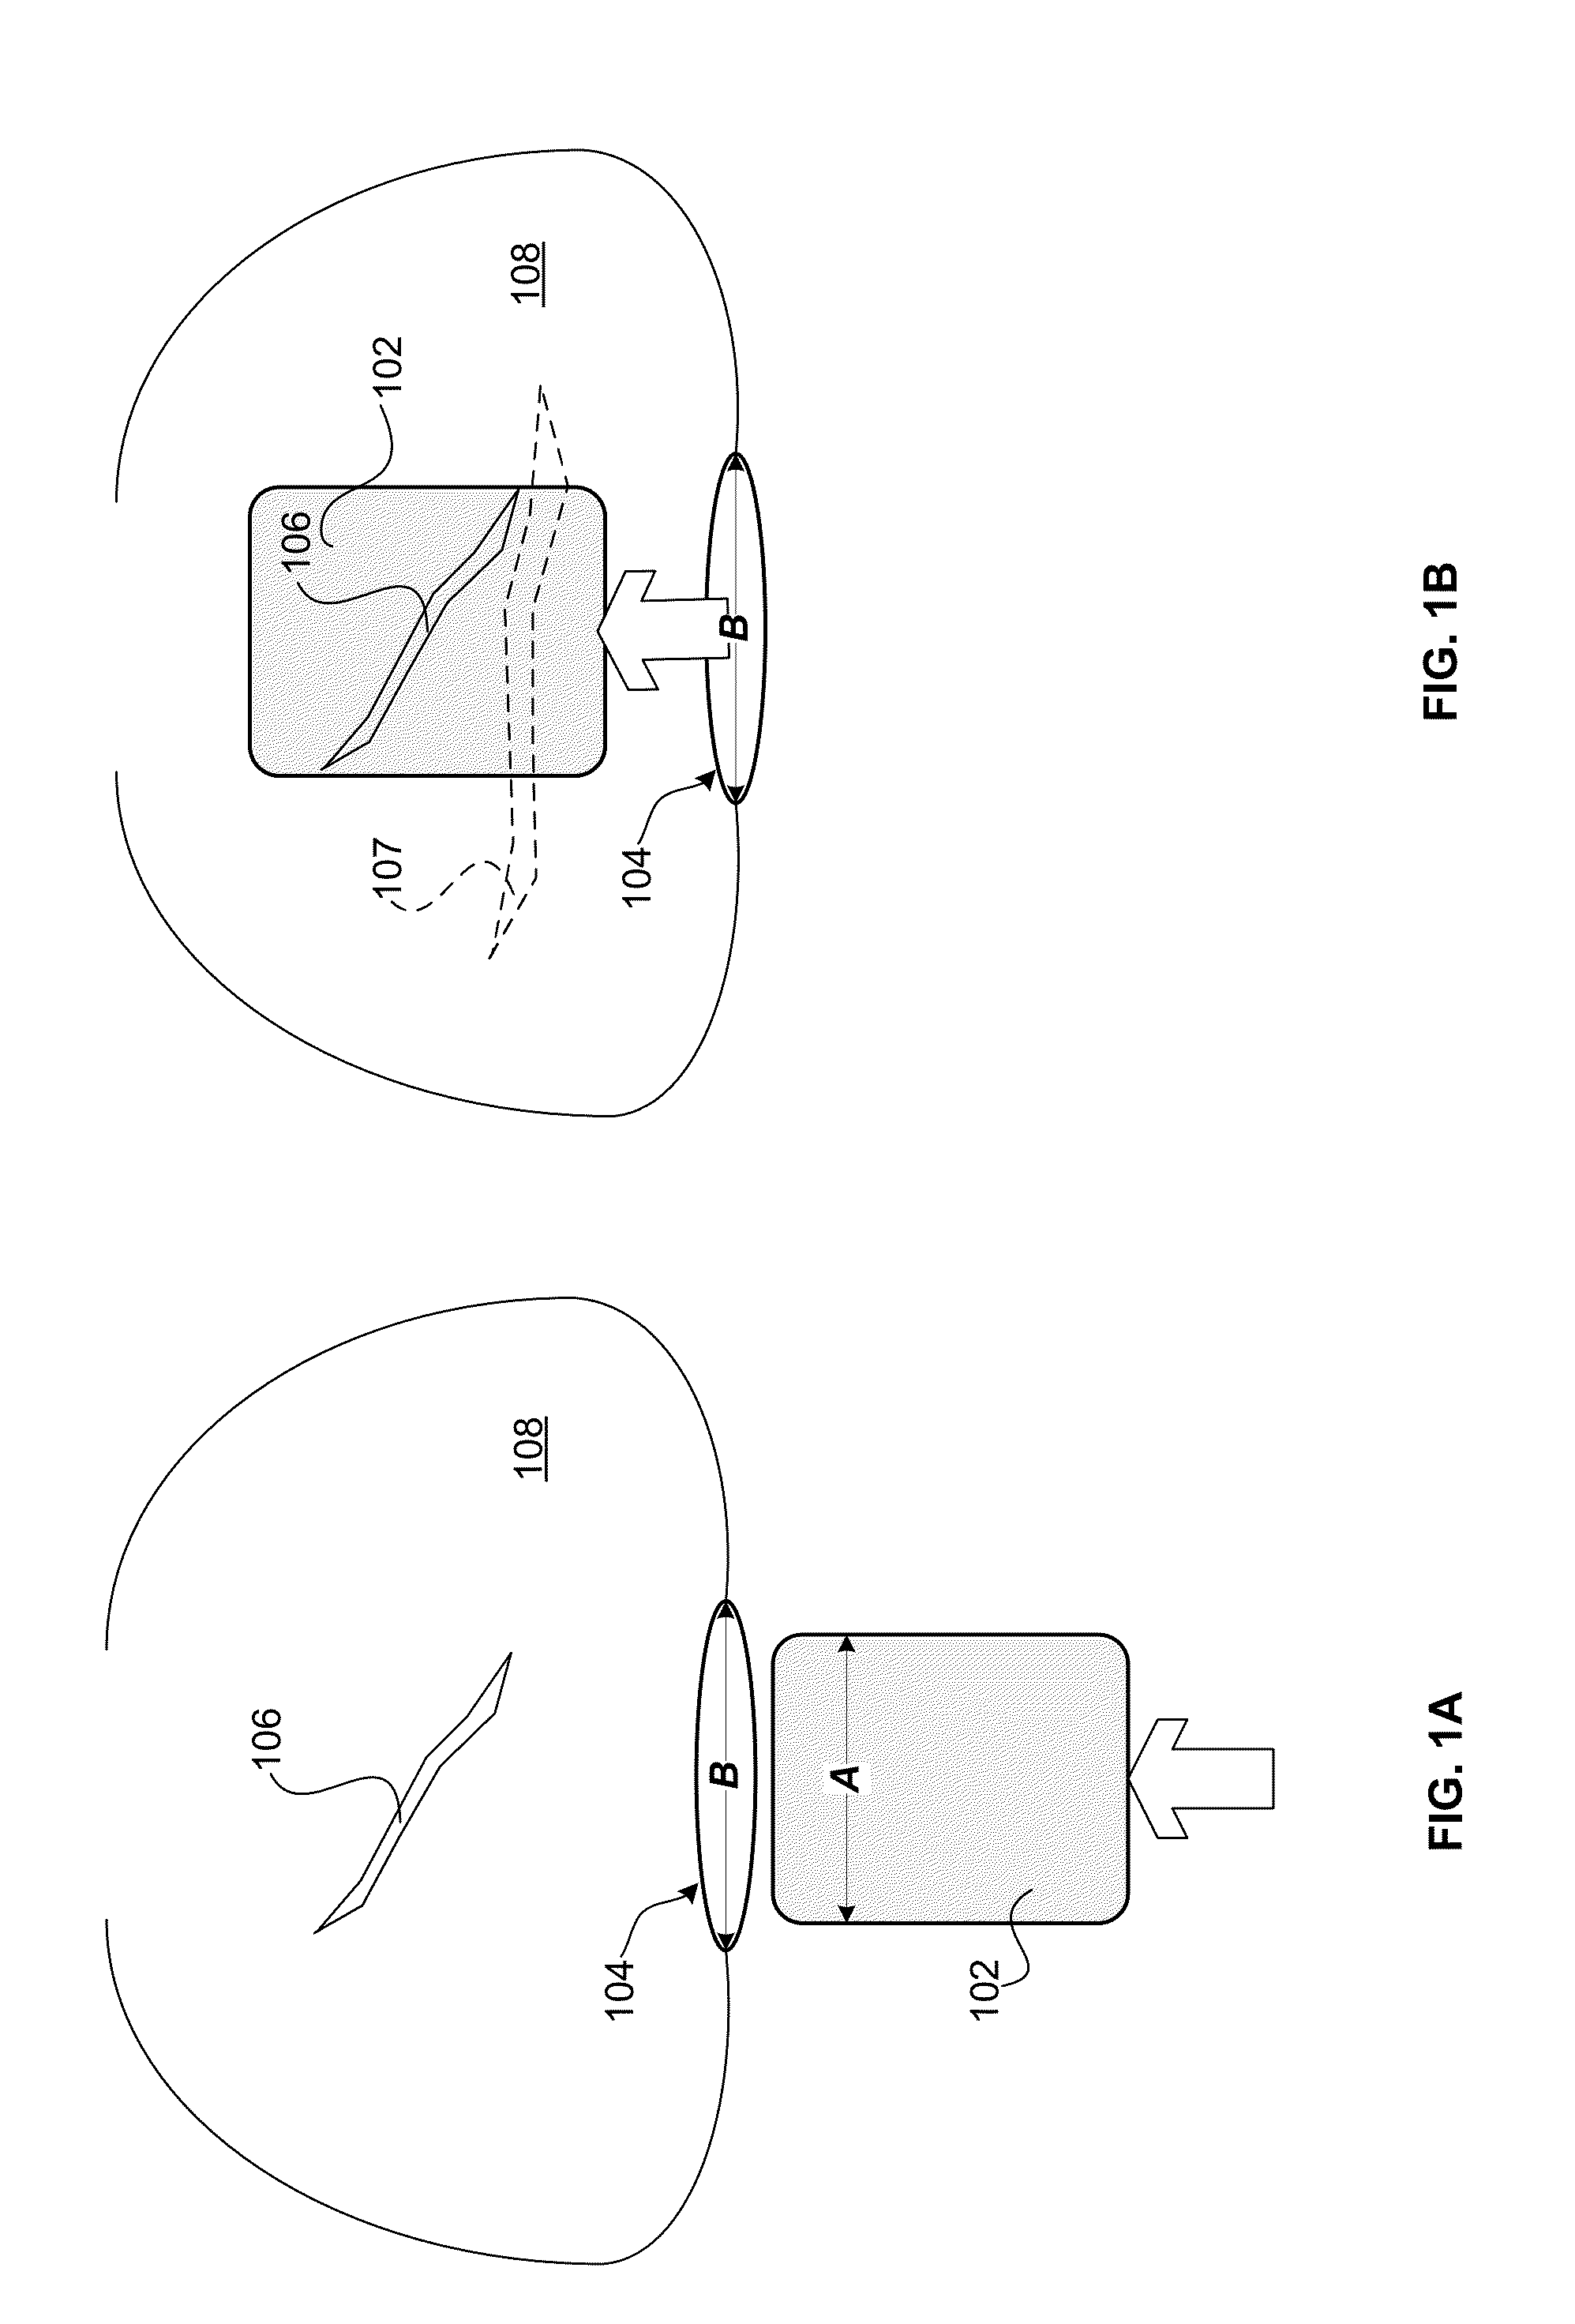 Expandable Surgical Implant Device